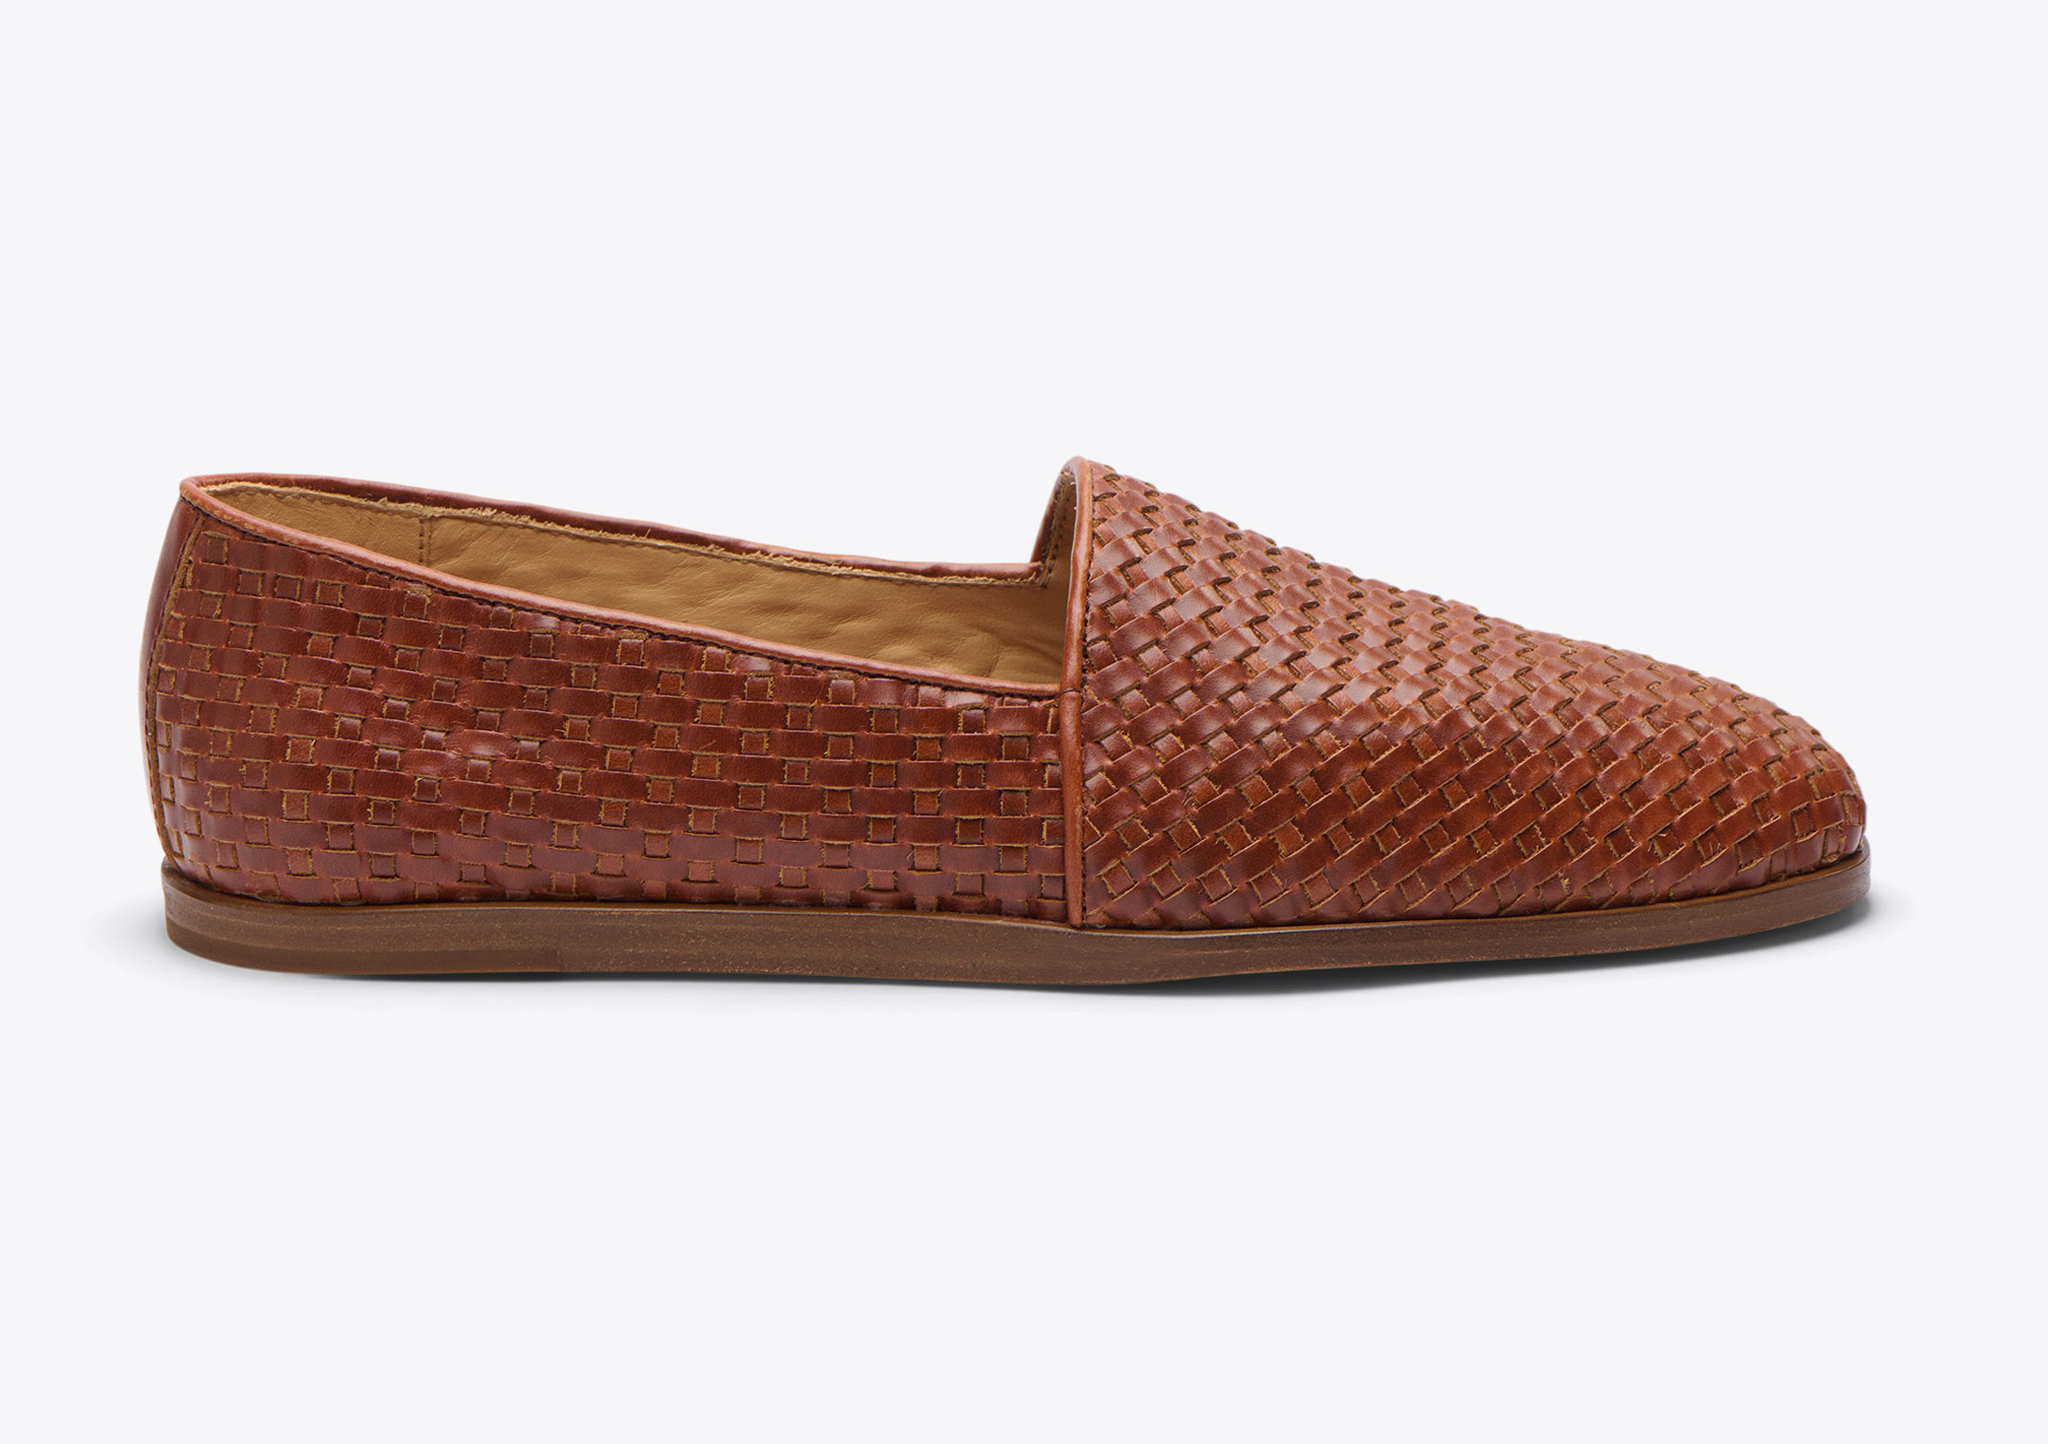 Nisolo Alejandro Woven Slip On Woven Brandy - Every Nisolo product is built on the foundation of comfort, function, and design. 